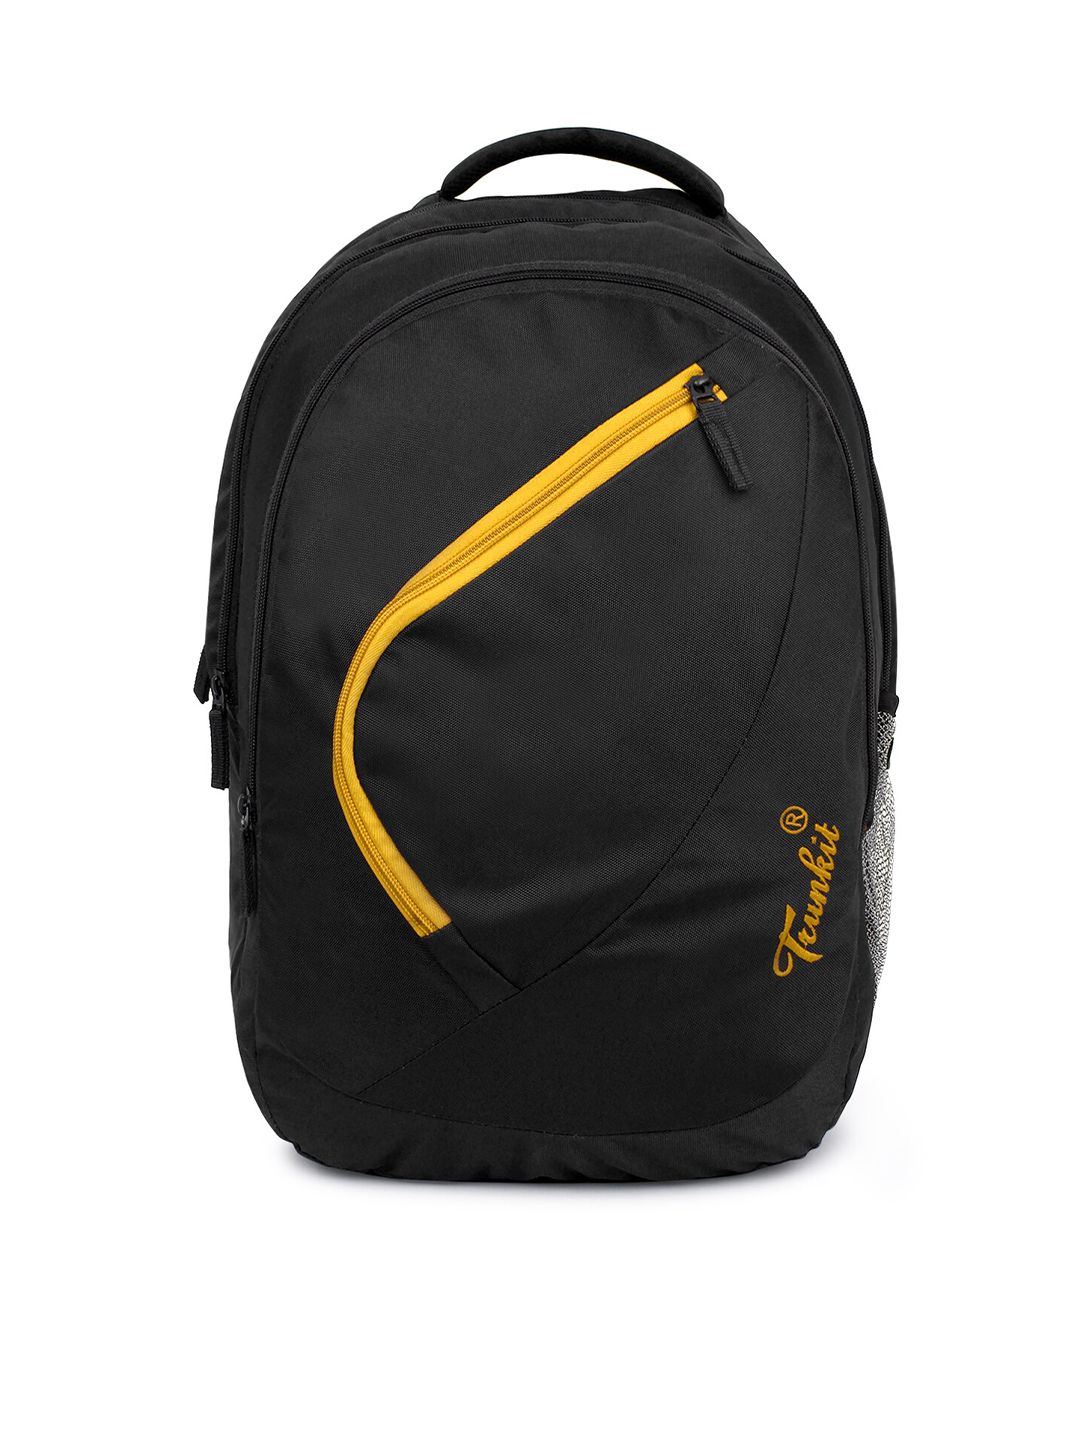 TRUNKIT Unisex Black & Yellow Textured 35 L Laptop Backpack Price in India